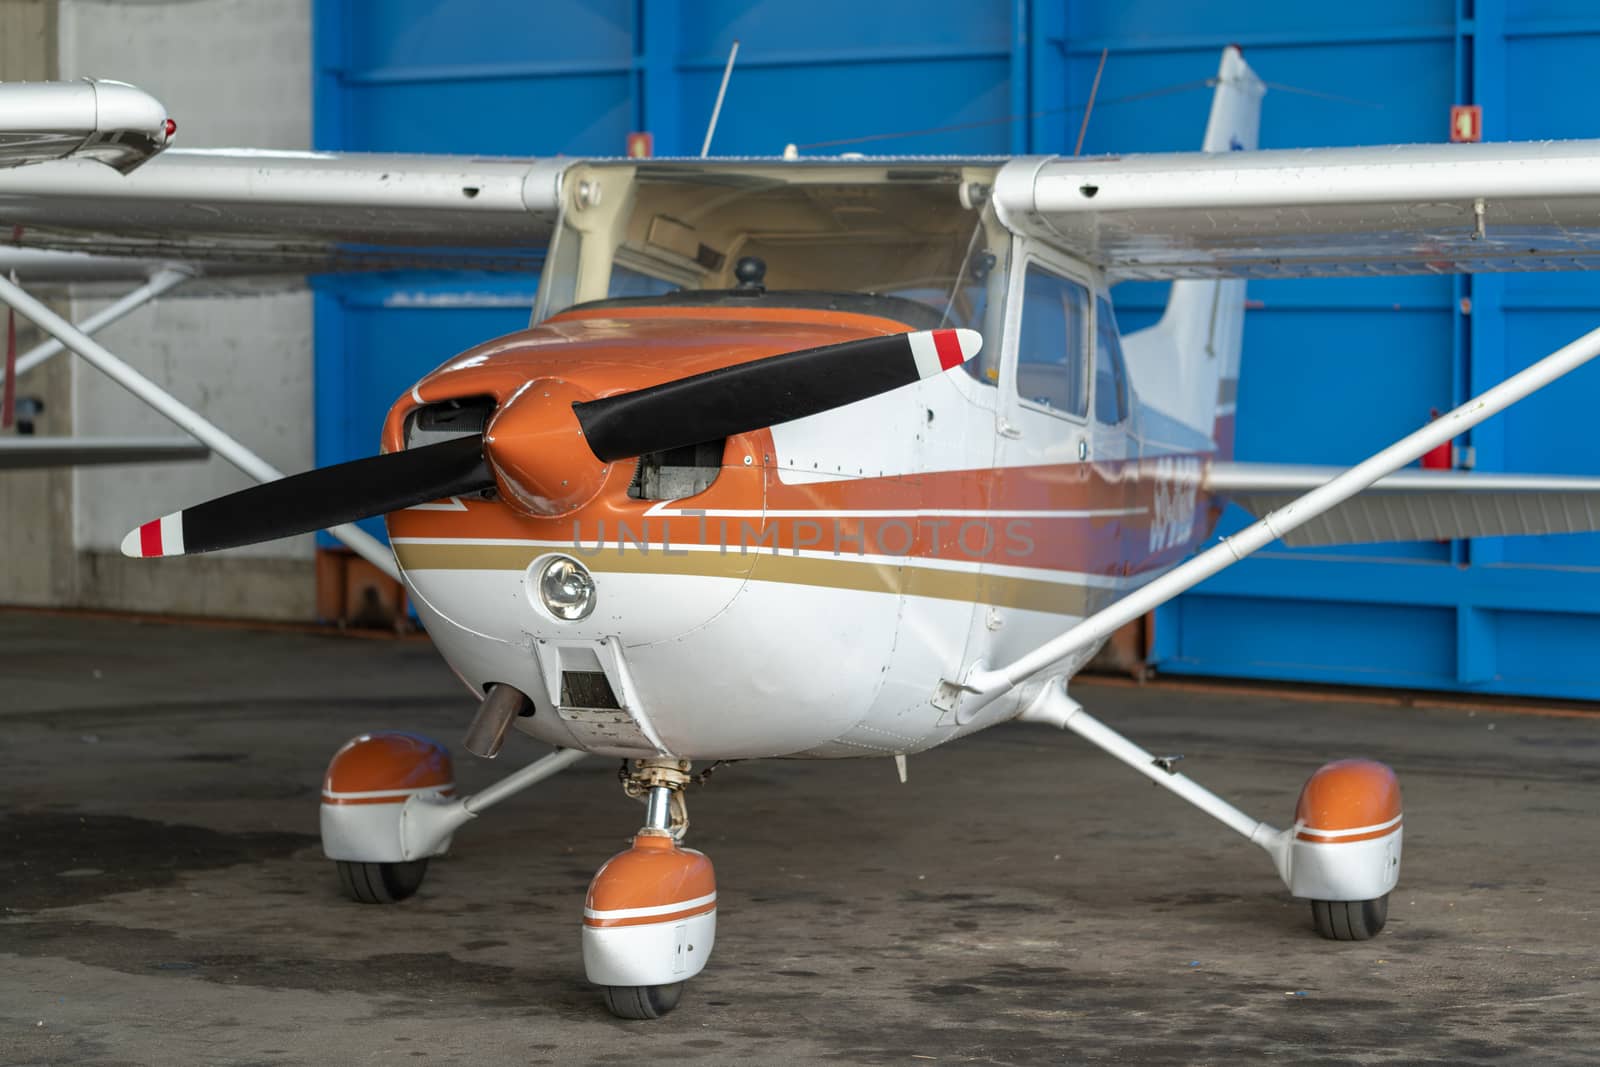 Small Sport Aircraft parked in hangar, close up. detail view of front, nose, cowling and propeller, piston aircraft